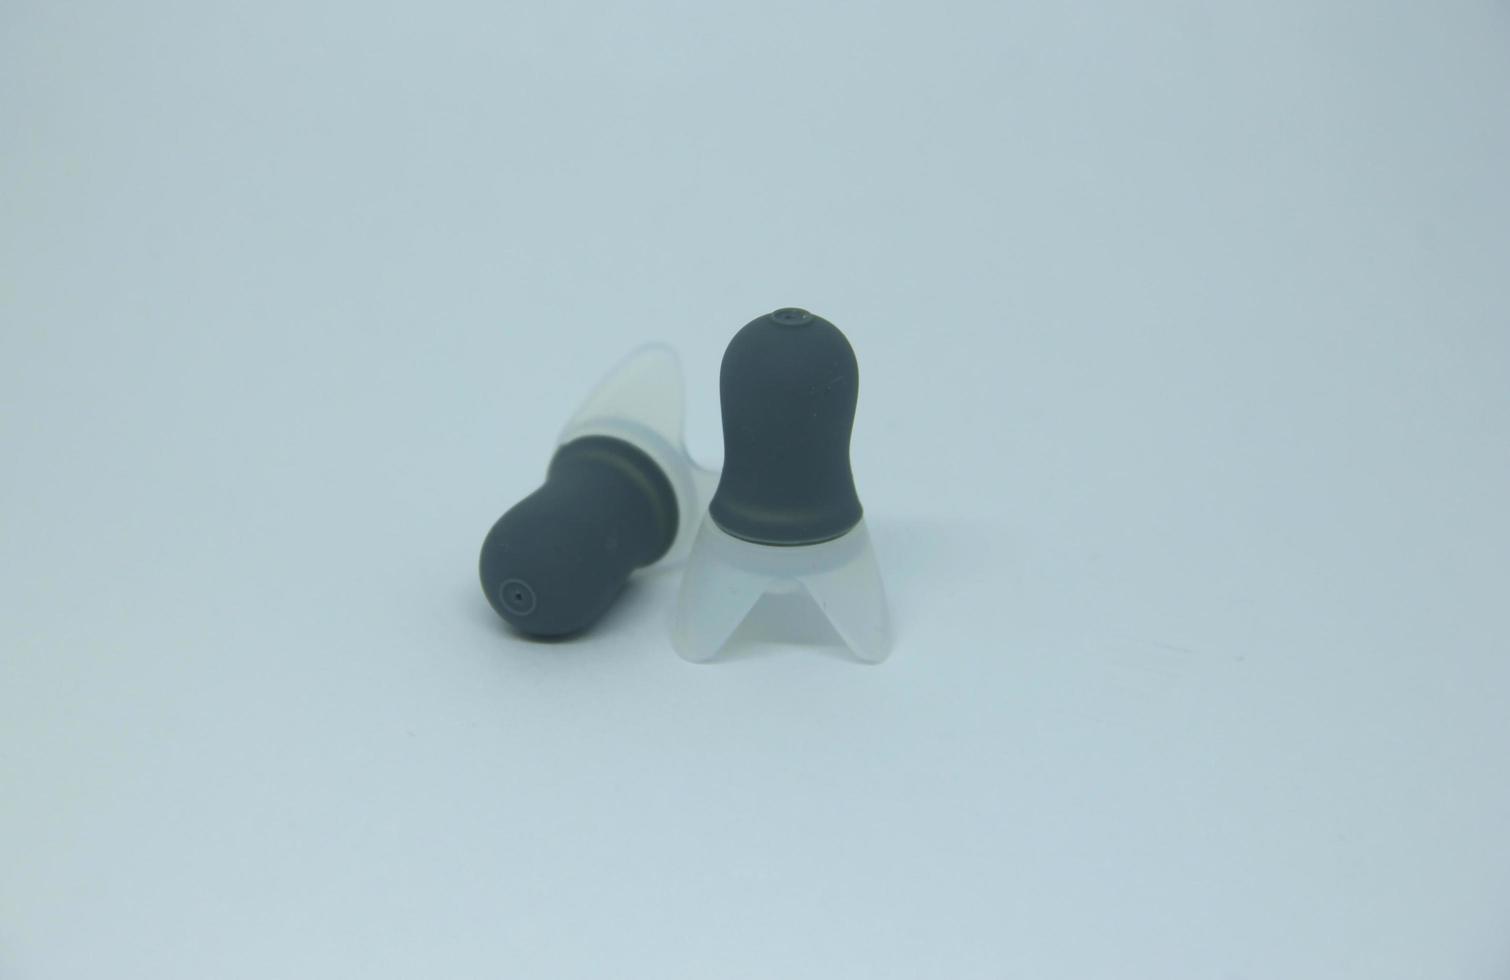 a couple of two gray ear plug without string. Object for blocking noises isolated photo on white background.